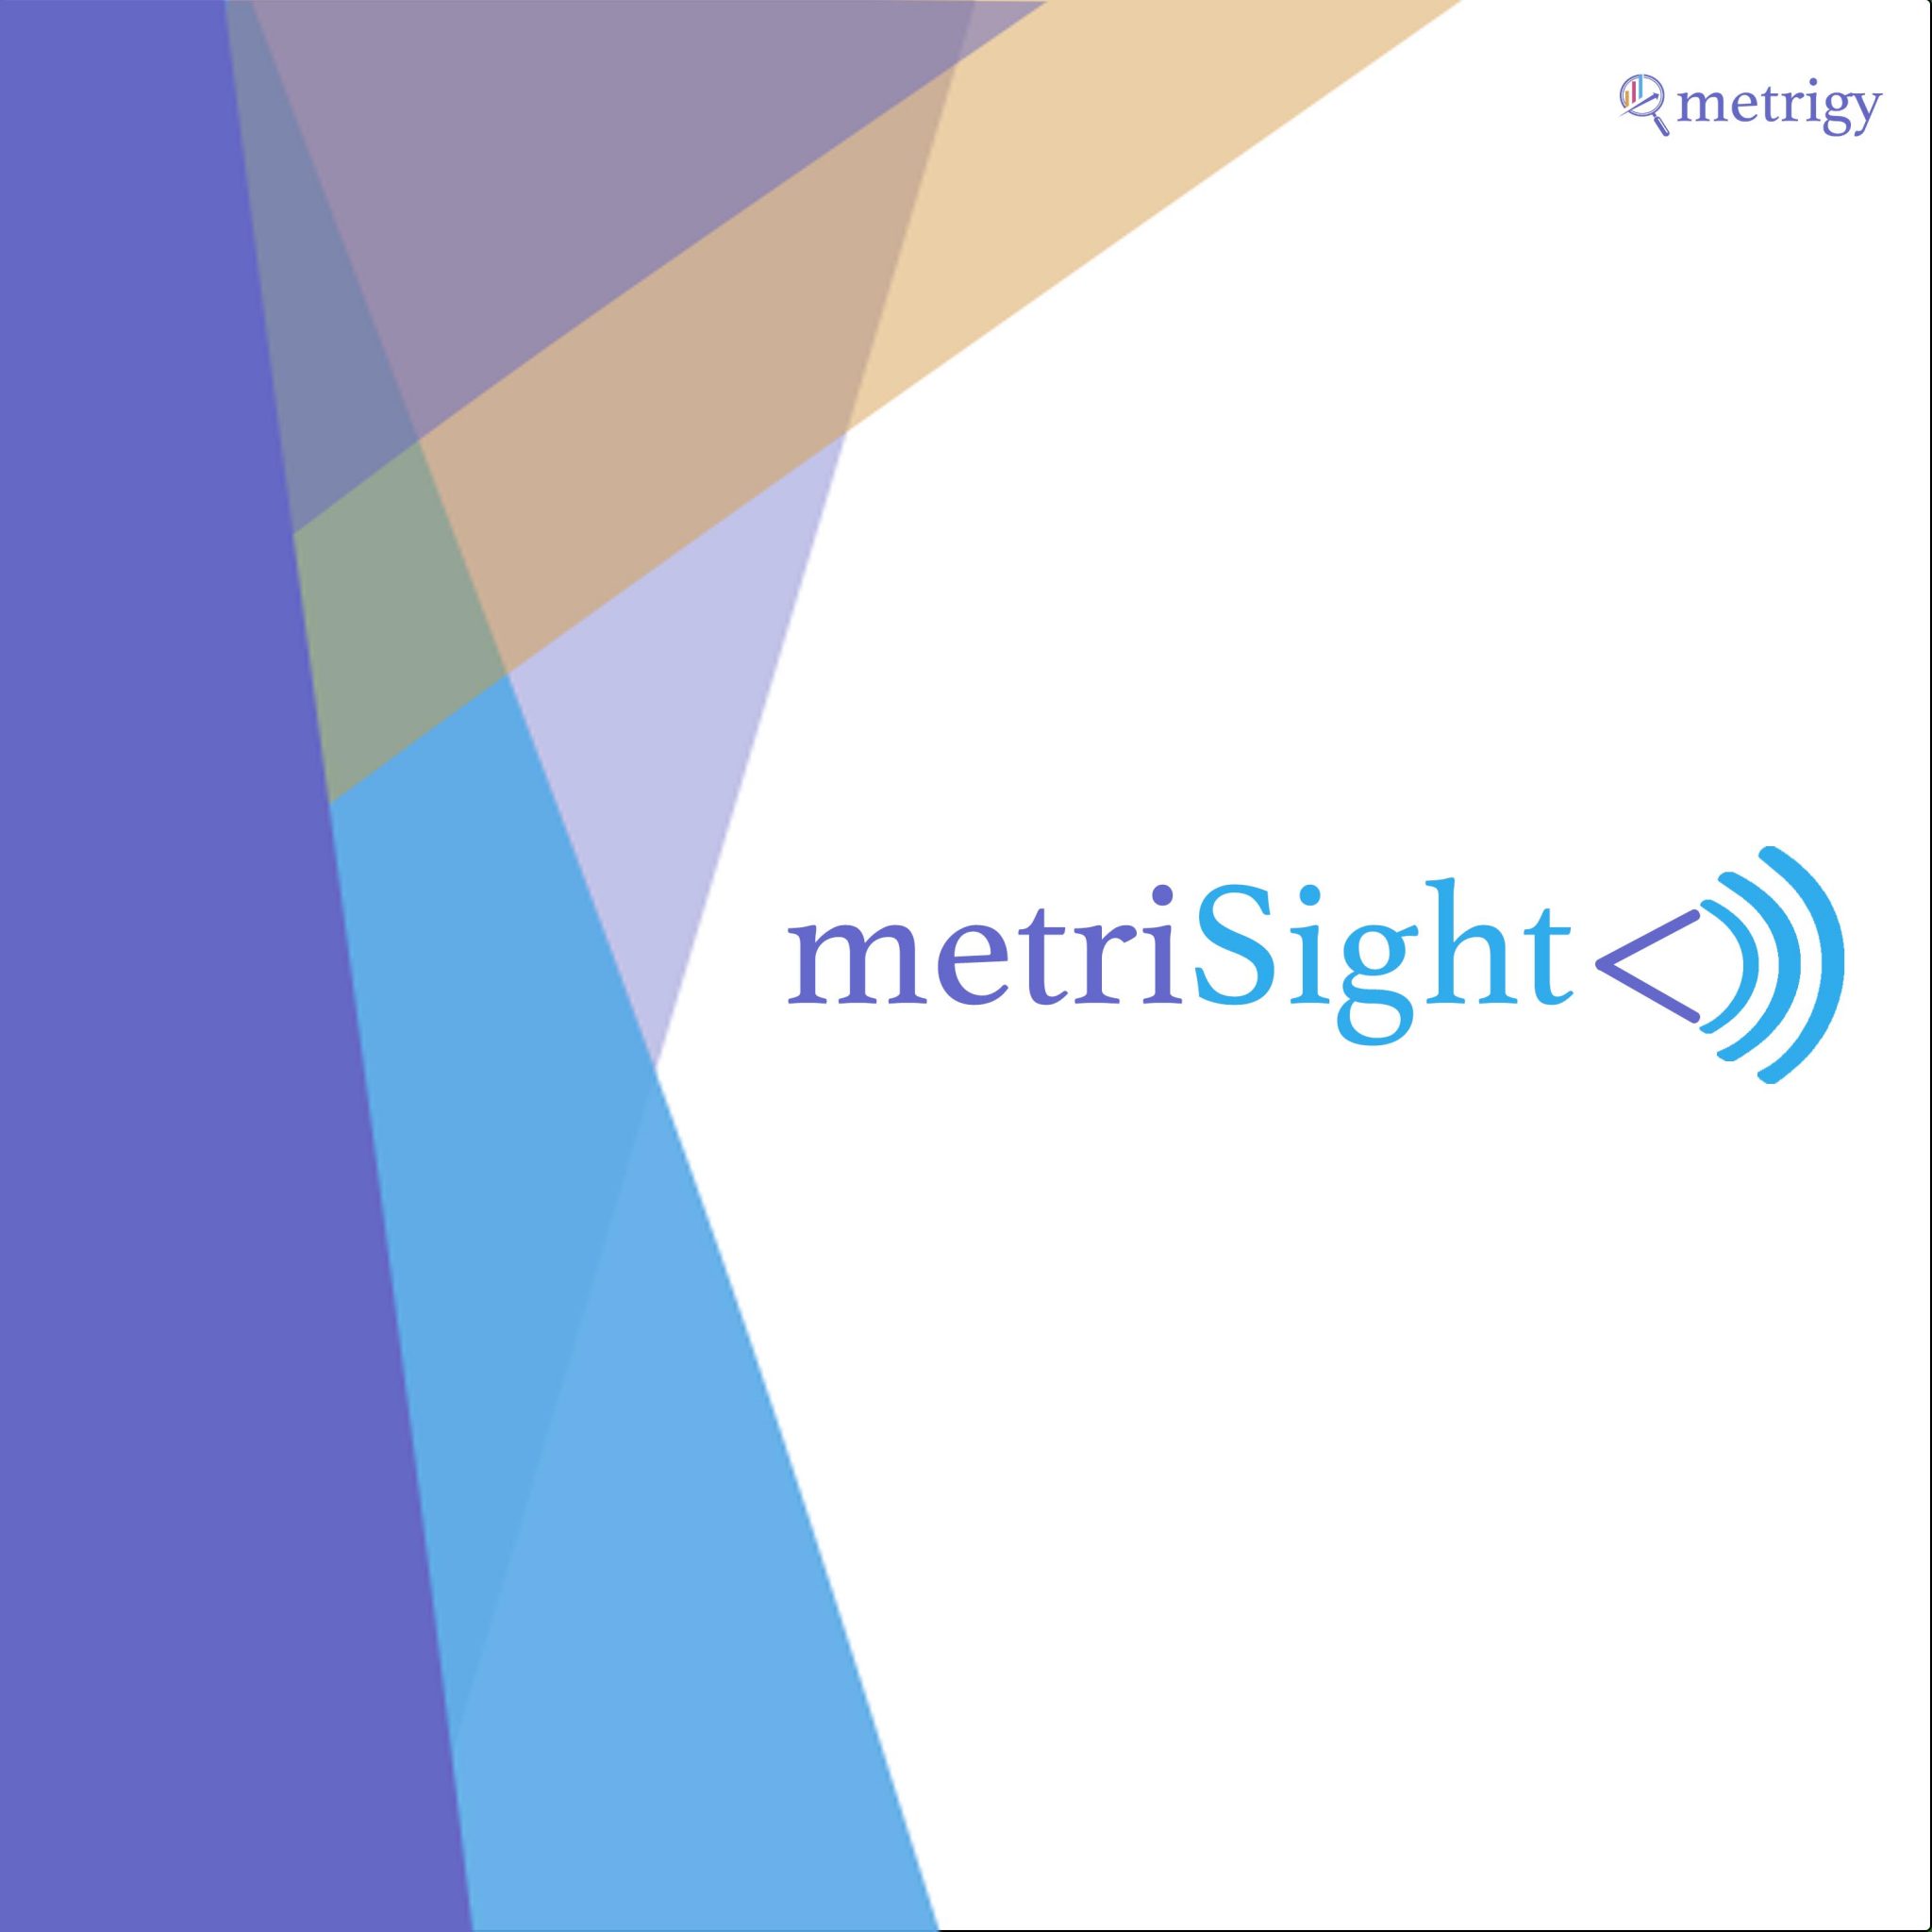 MetriSight Ep. 12 - Workflow Management on Tap